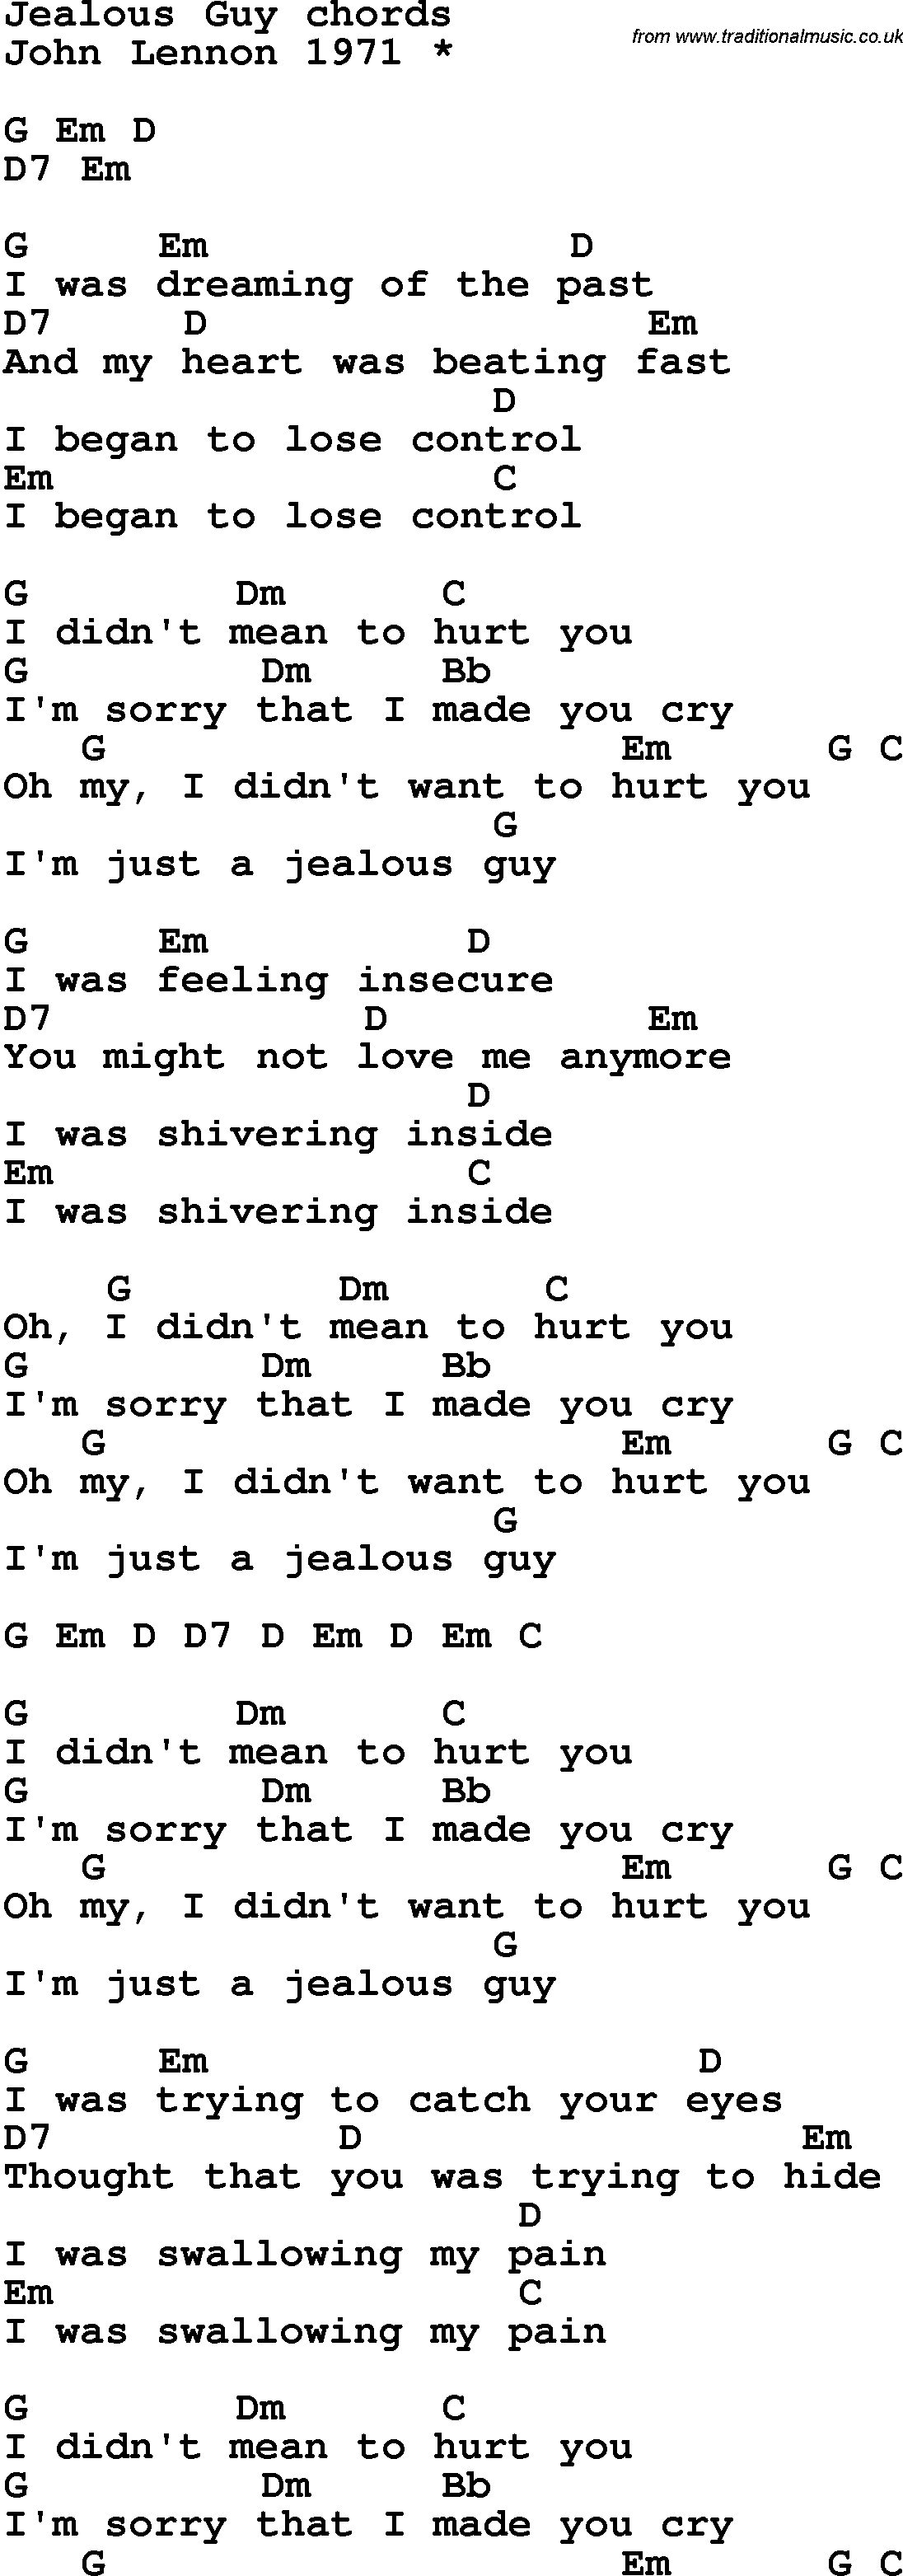 Song Lyrics with guitar chords for Jealous Guy